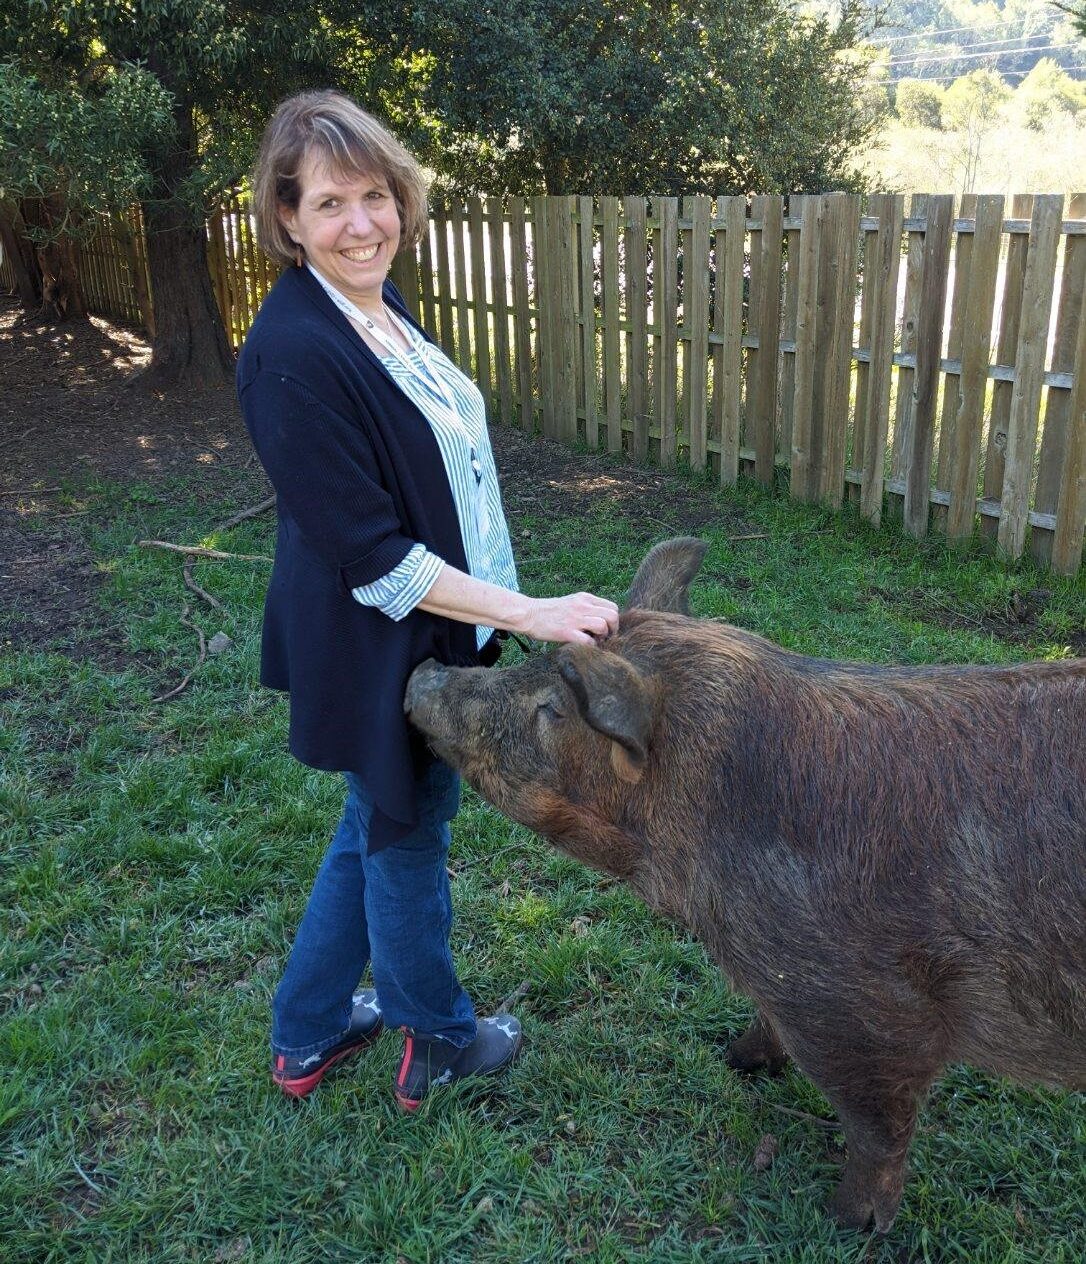 Beth with a pig